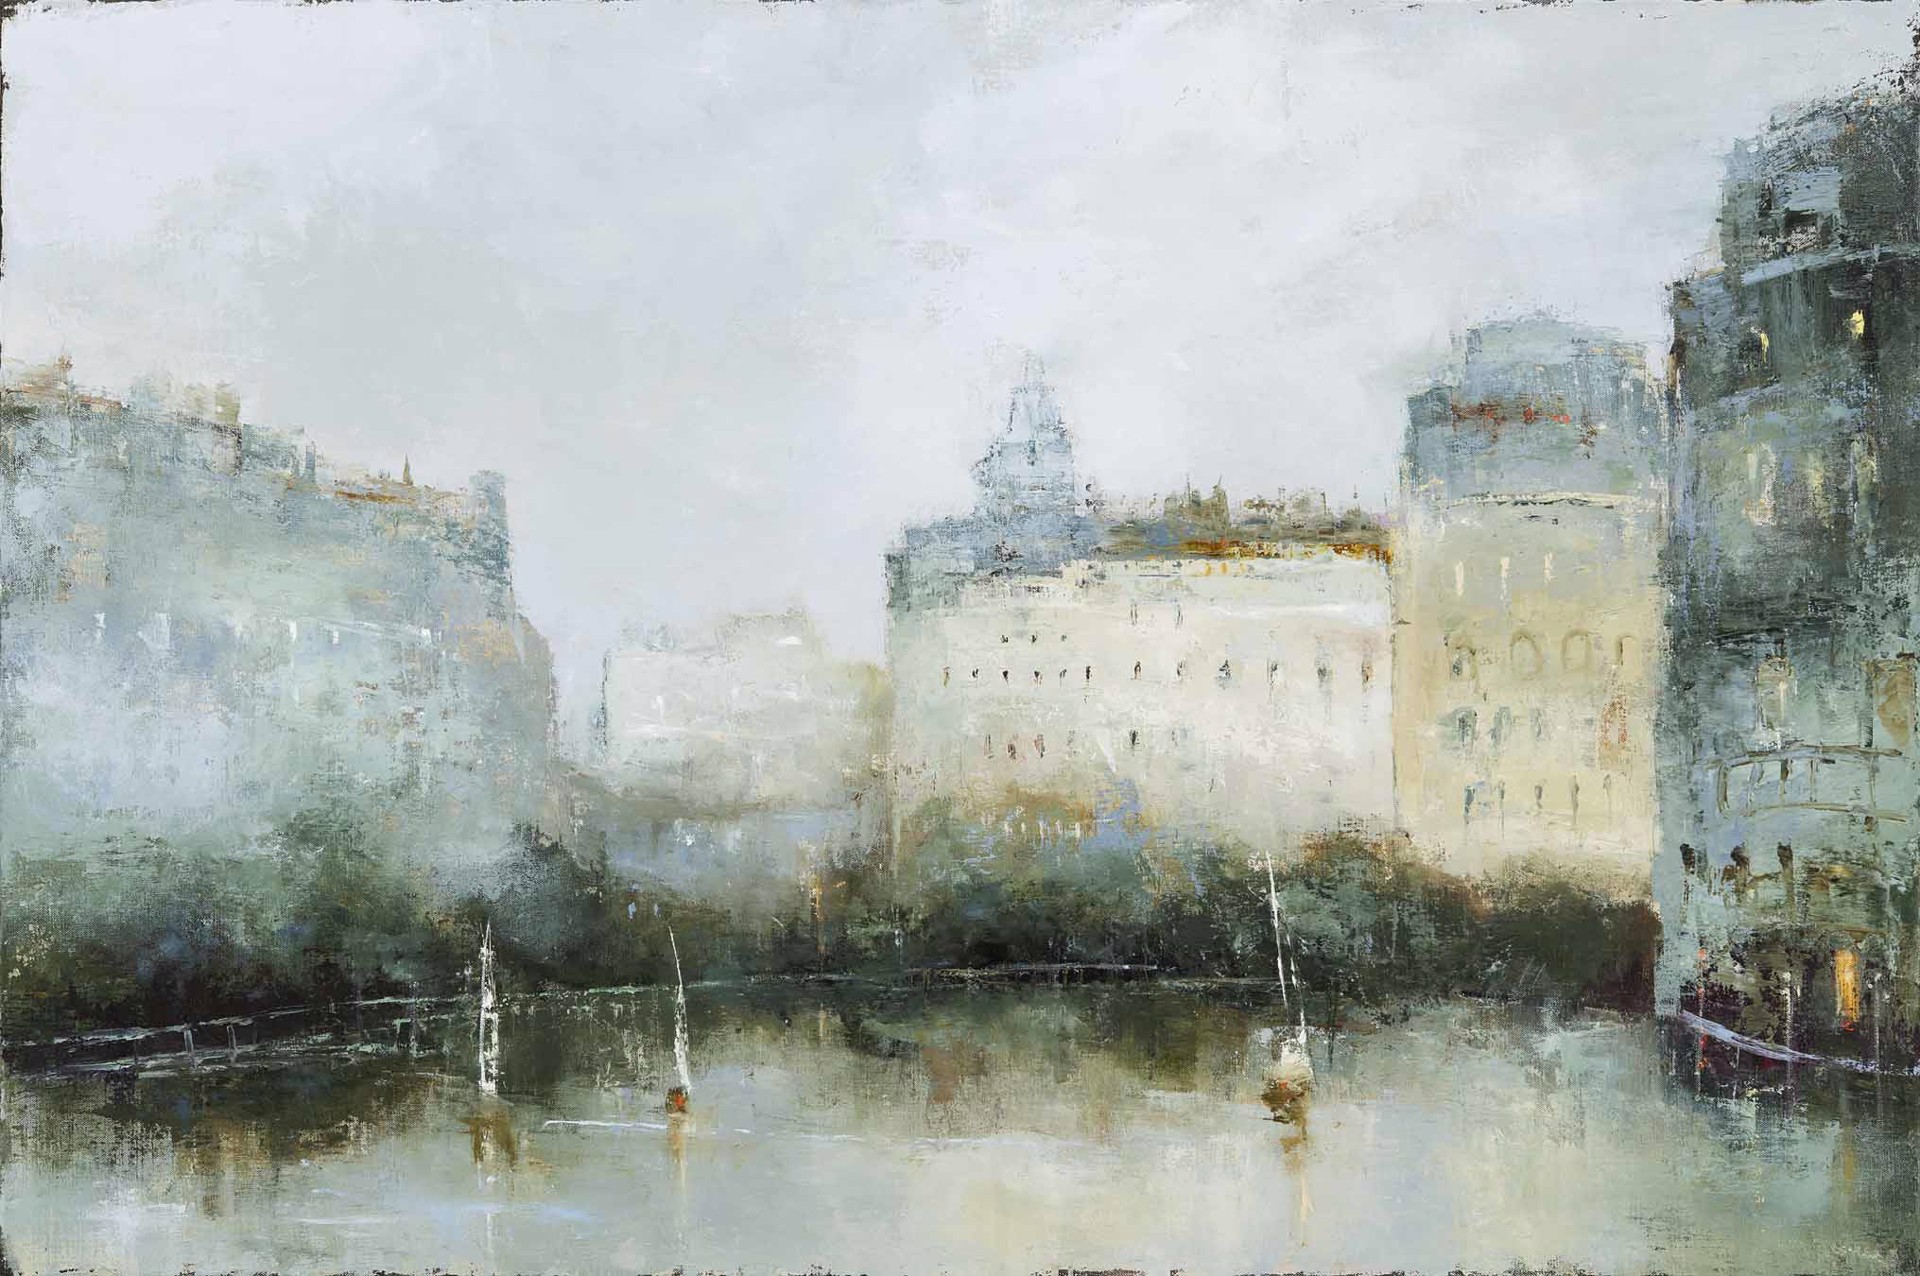 The Shade of Passing Thoughts by France Jodoin